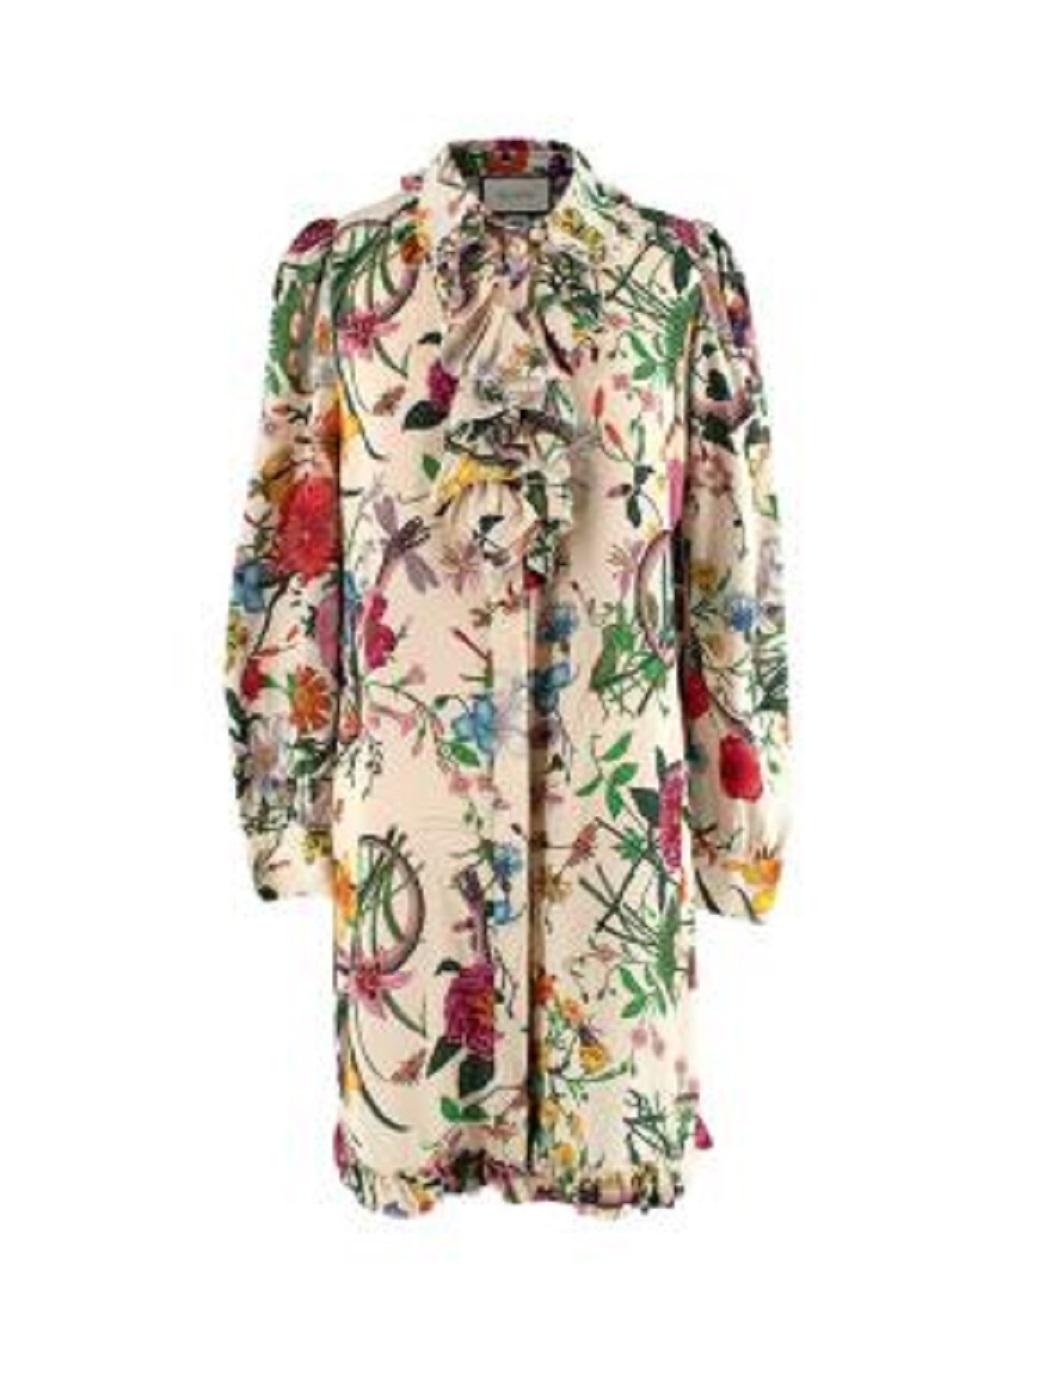 Gucci Floral Frilled Silk Dress

-Concealed button fastening 
-Floral body print 
-Buttoned cuffs 
-Faux pearl gg buttons 
-Ruffled hem 

Material: 

Silk 

Made in Italy 

9.5/10 excellent conditions, please refer to images for further details.